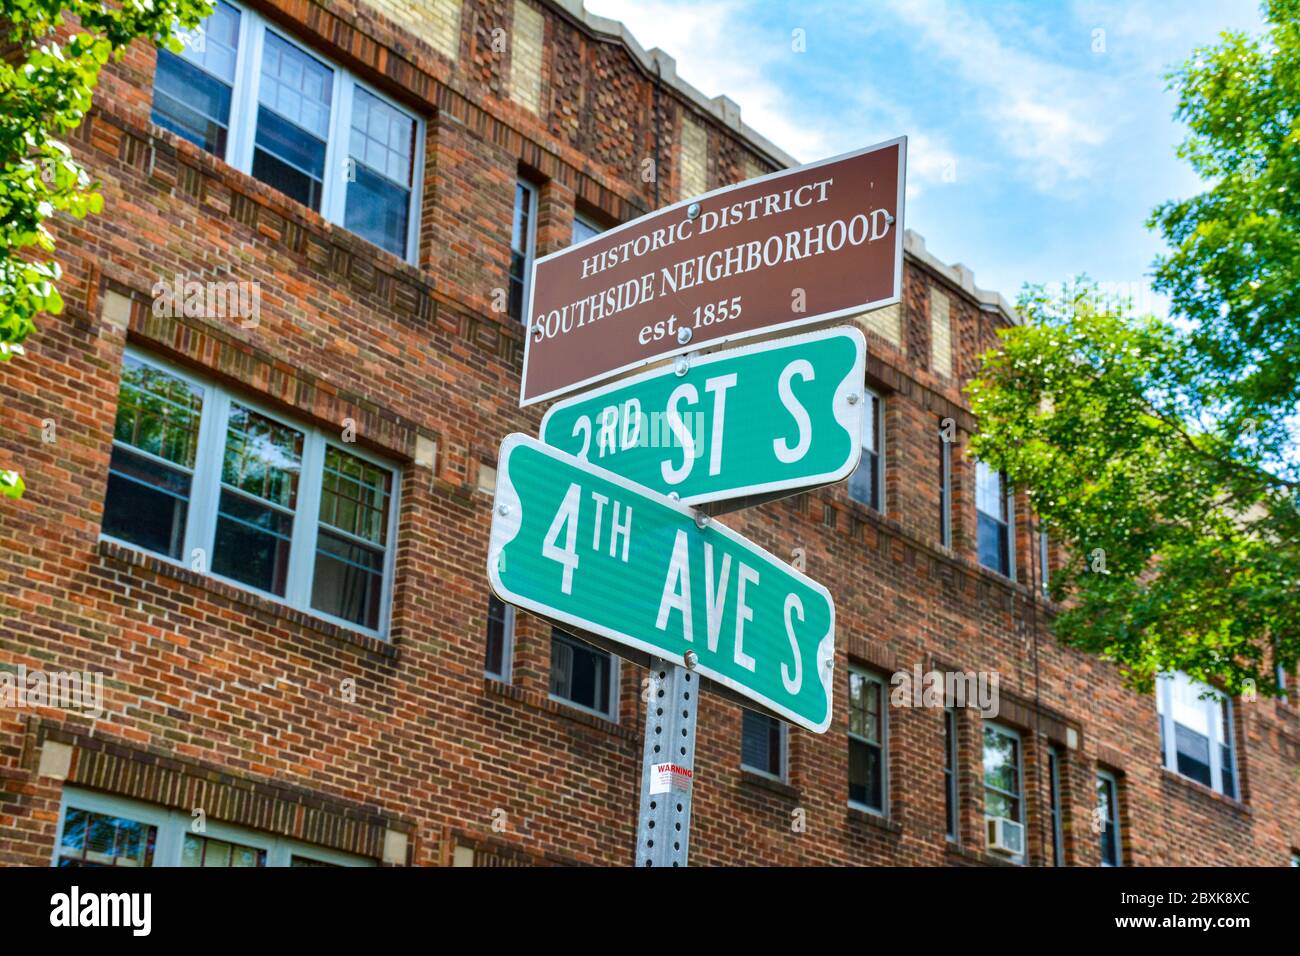 Street signs and an Historic District Southside Neighborhood marker before an old brick building in small town America, St. Cloud, MN, USA Stock Photo